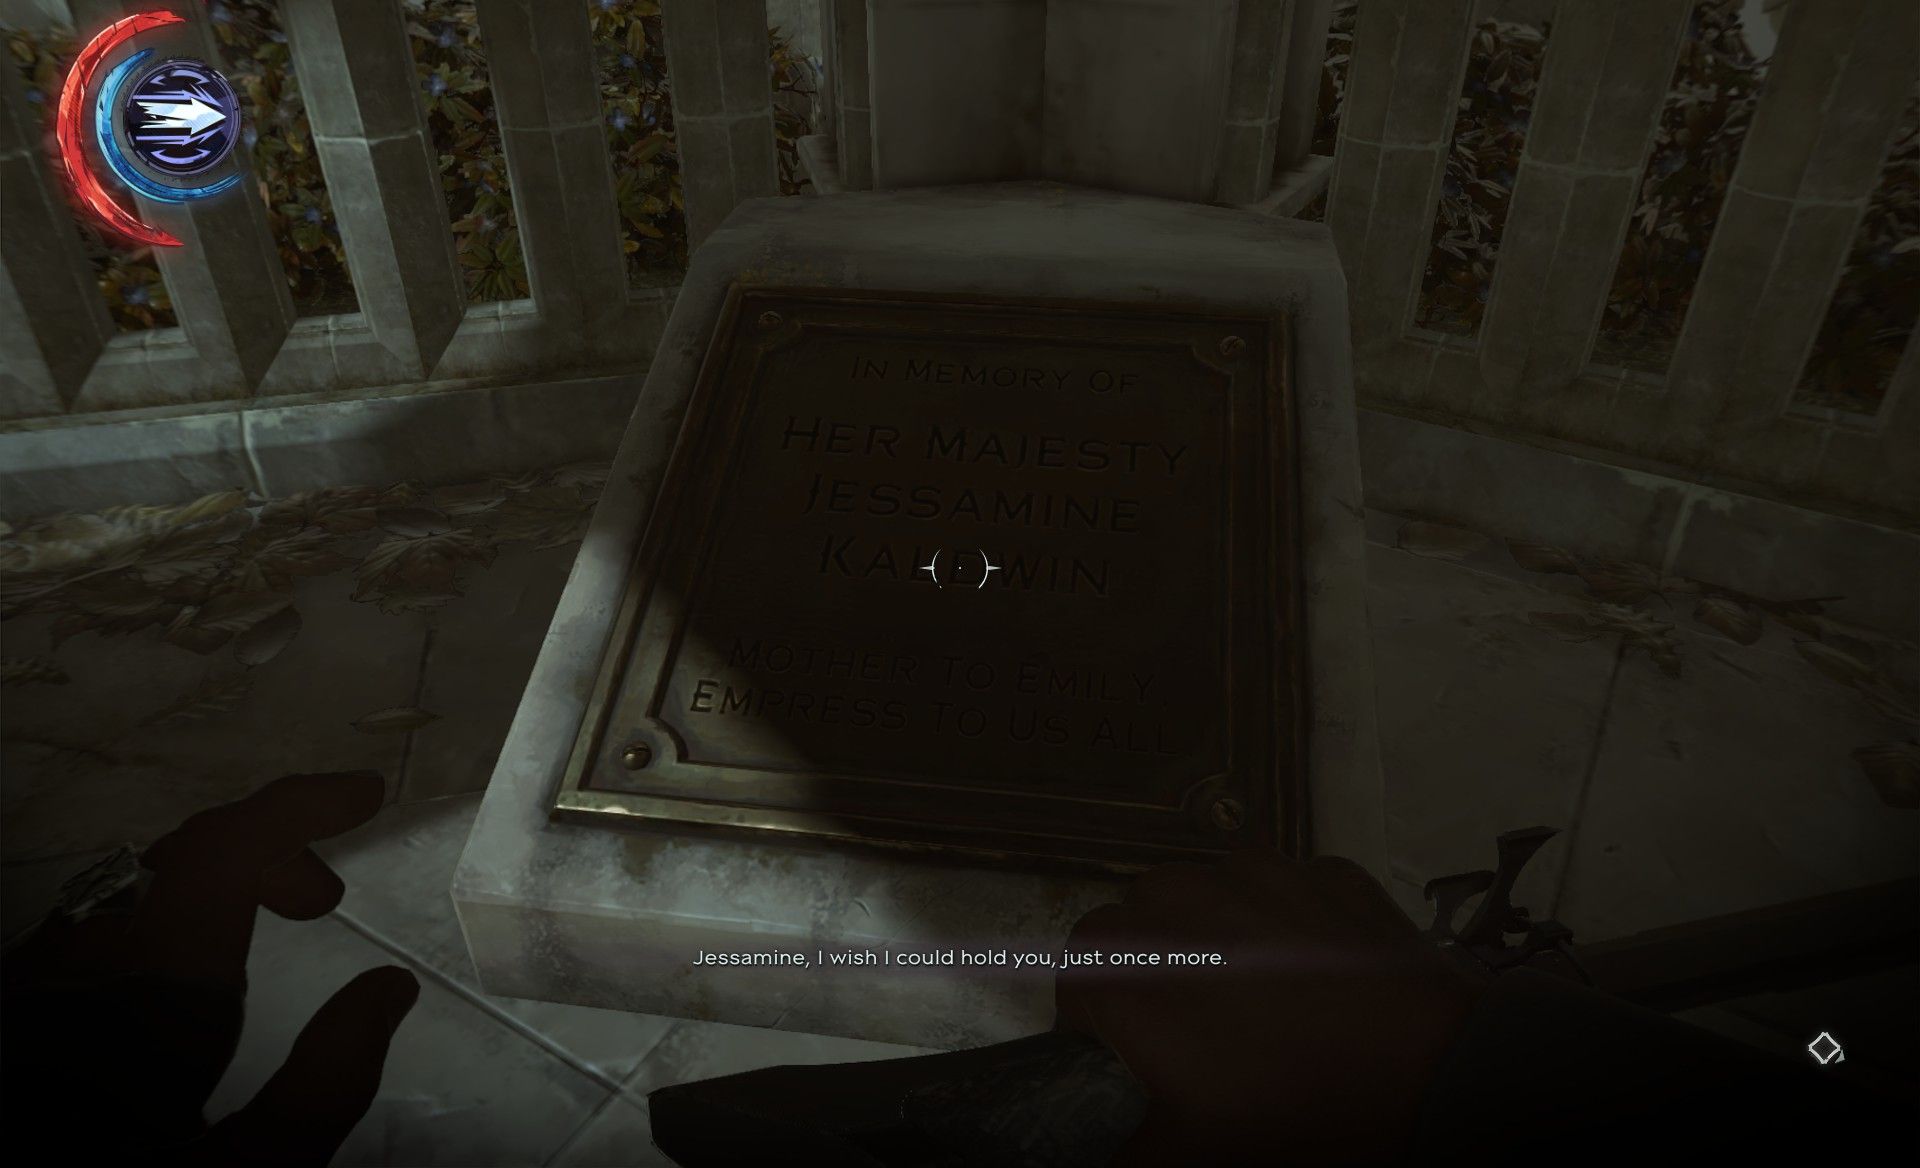 Flesh and Steel achievement in Dishonored 2